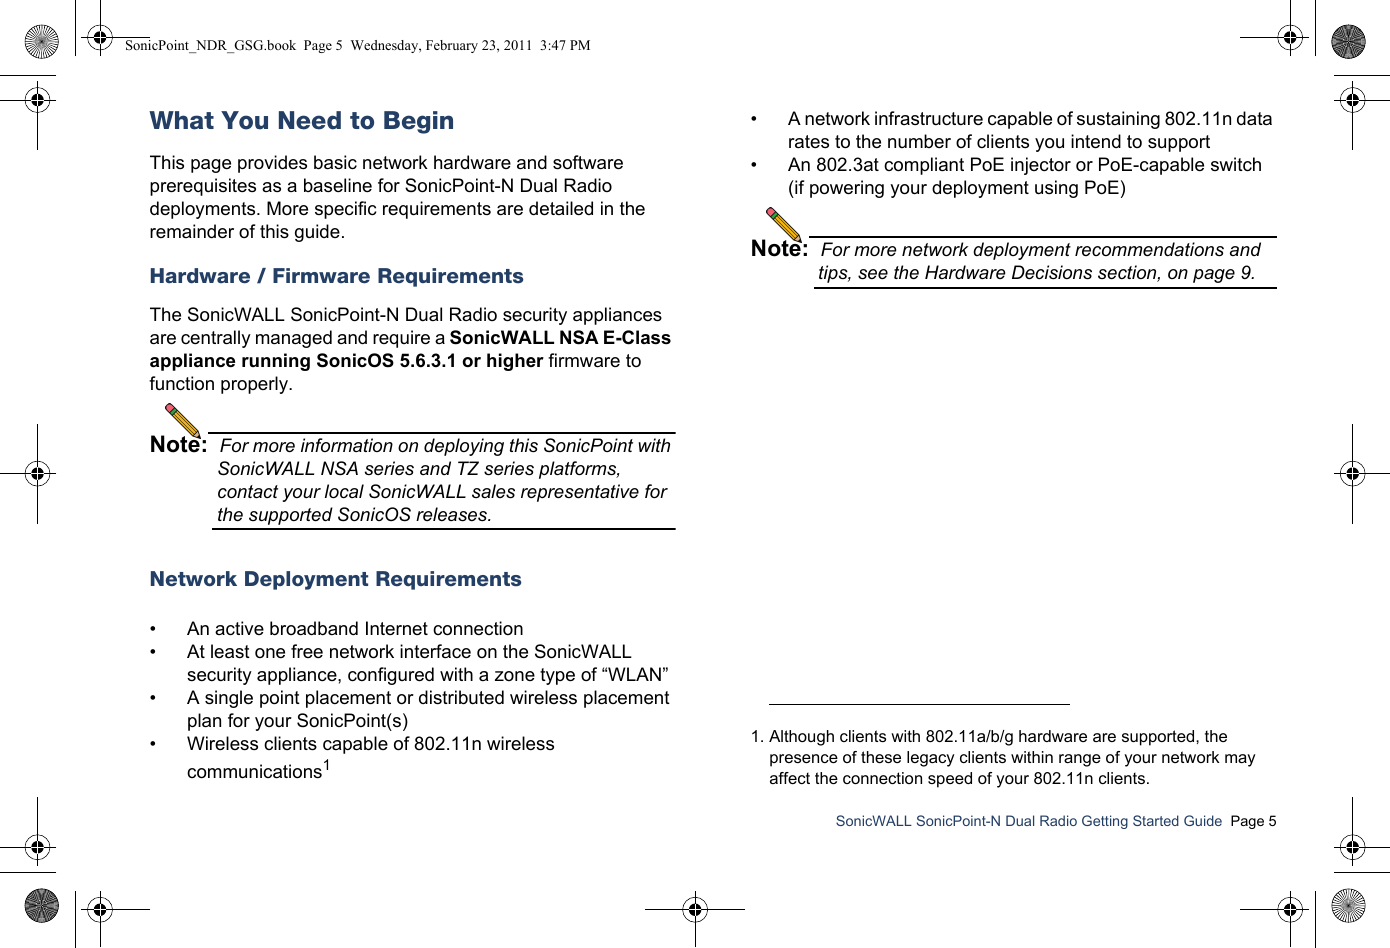 SonicWALL SonicPoint-N Dual Radio Getting Started Guide  Page 5What You Need to BeginThis page provides basic network hardware and software prerequisites as a baseline for SonicPoint-N Dual Radio deployments. More specific requirements are detailed in the remainder of this guide.Hardware / Firmware RequirementsThe SonicWALL SonicPoint-N Dual Radio security appliances are centrally managed and require a SonicWALL NSA E-Class appliance running SonicOS 5.6.3.1 or higher firmware to function properly.Note:  For more information on deploying this SonicPoint with SonicWALL NSA series and TZ series platforms, contact your local SonicWALL sales representative for the supported SonicOS releases.Network Deployment Requirements• An active broadband Internet connection• At least one free network interface on the SonicWALL security appliance, configured with a zone type of “WLAN”• A single point placement or distributed wireless placement plan for your SonicPoint(s)• Wireless clients capable of 802.11n wireless communications1• A network infrastructure capable of sustaining 802.11n data rates to the number of clients you intend to support• An 802.3at compliant PoE injector or PoE-capable switch (if powering your deployment using PoE)Note:  For more network deployment recommendations and tips, see the Hardware Decisions section, on page 9.1. Although clients with 802.11a/b/g hardware are supported, the presence of these legacy clients within range of your network may affect the connection speed of your 802.11n clients.SonicPoint_NDR_GSG.book  Page 5  Wednesday, February 23, 2011  3:47 PM